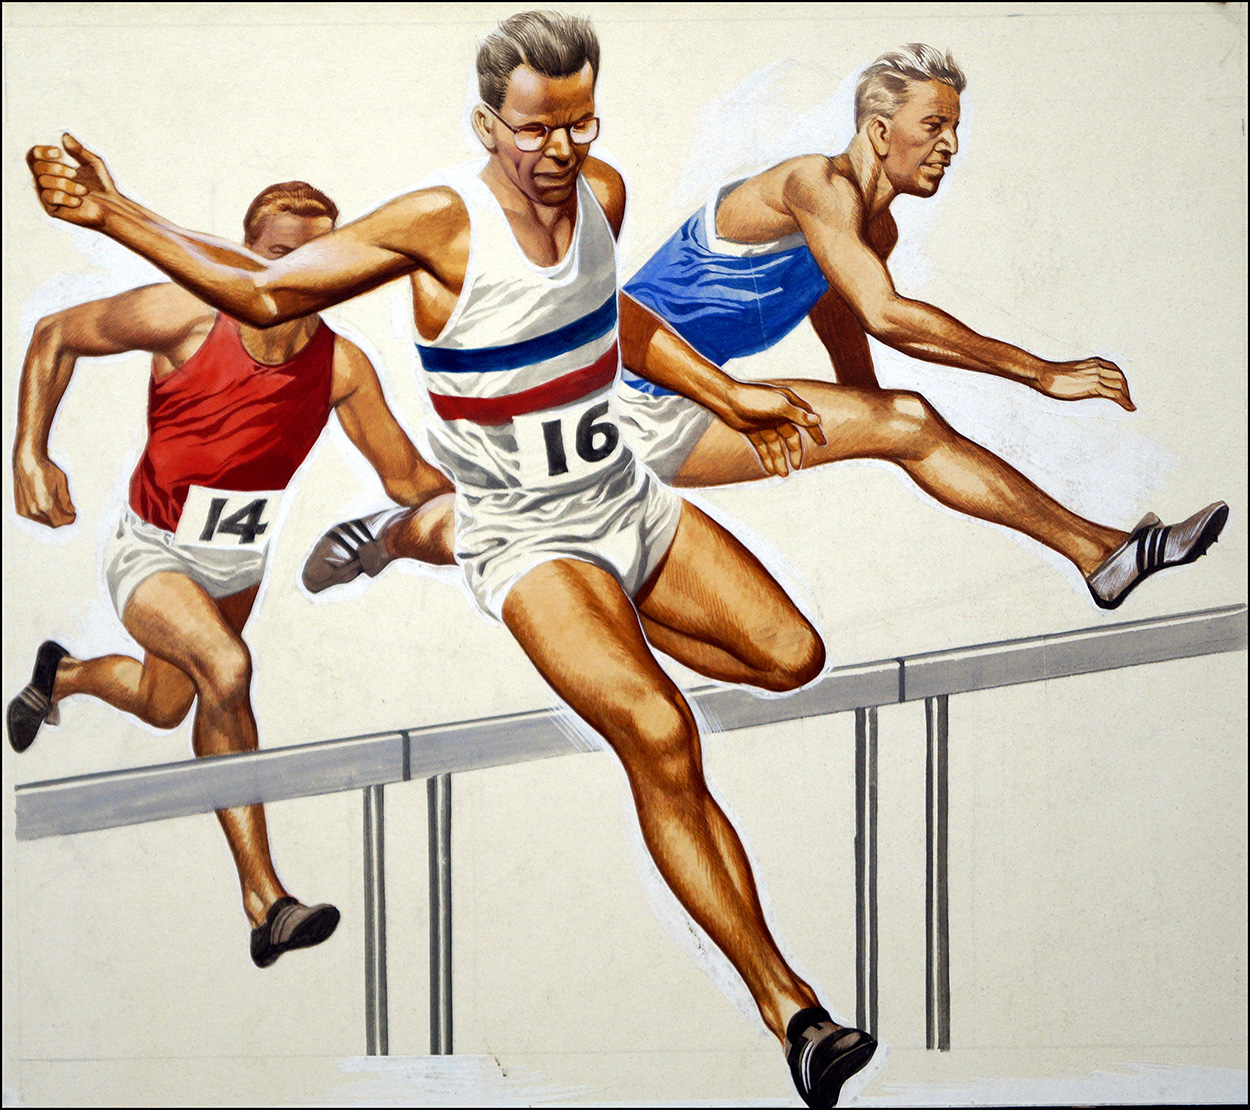 The Magic of the Olympics: Chris Brasher (Original) art by The Olympics (Ron Embleton) at The Illustration Art Gallery